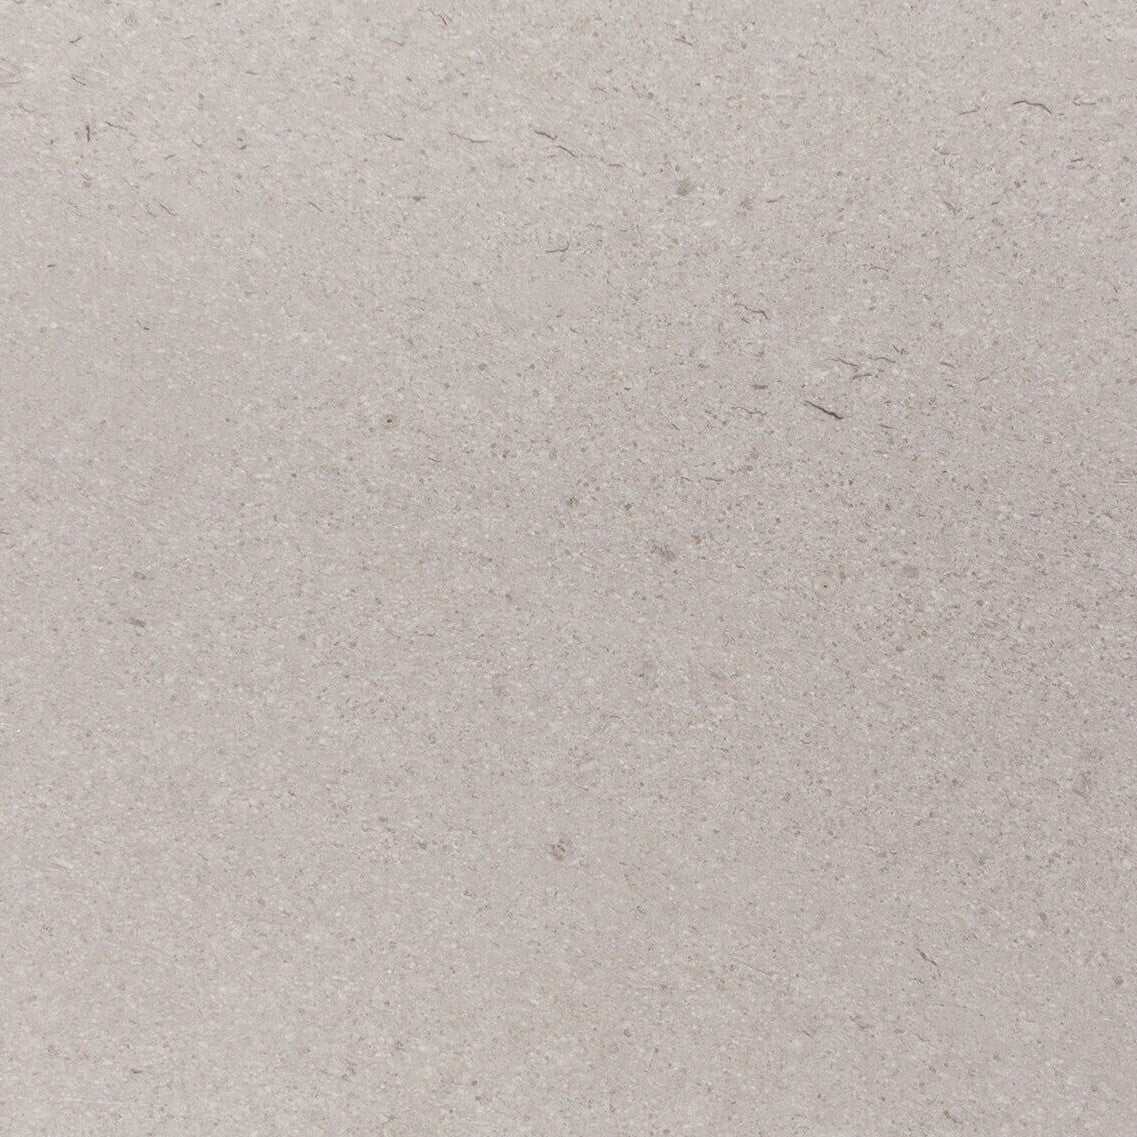 tao limestone gray stone tile  sold by surface group